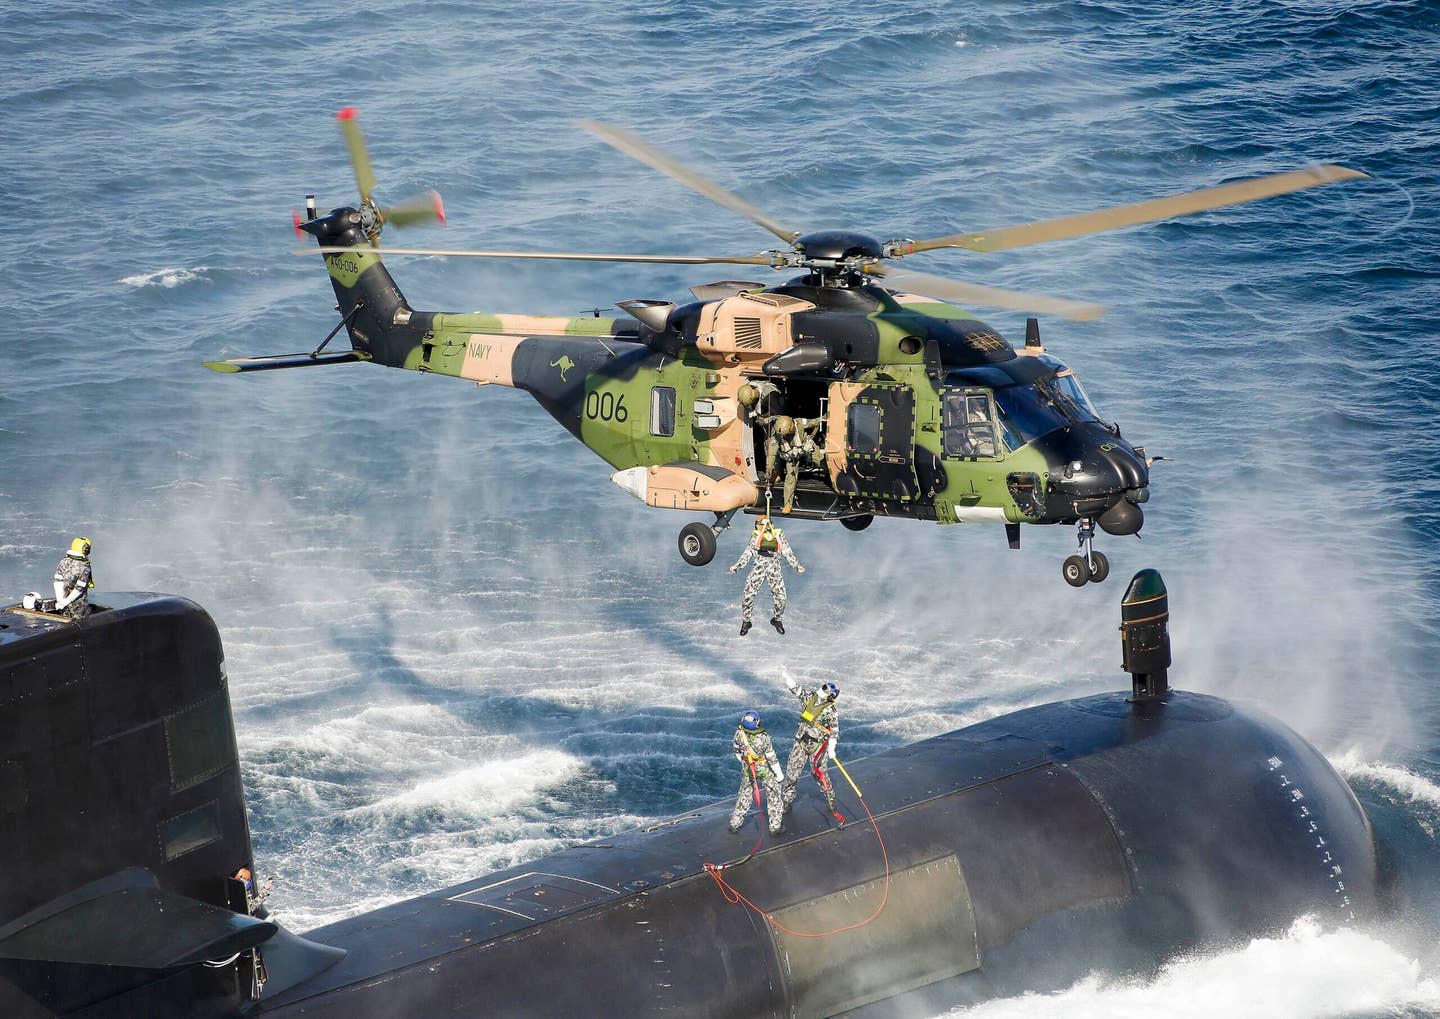 A Royal Australian Navy 808 Squadron NH-90 Tactical Transport Helicopter conducts a personnel winch from an Australian <em>Collins </em>class diesel-electric submarine prior to the early retirement of the Navy’s NH-90s in April 2022. <em>Commonwealth of Australia, Department of Defense</em>